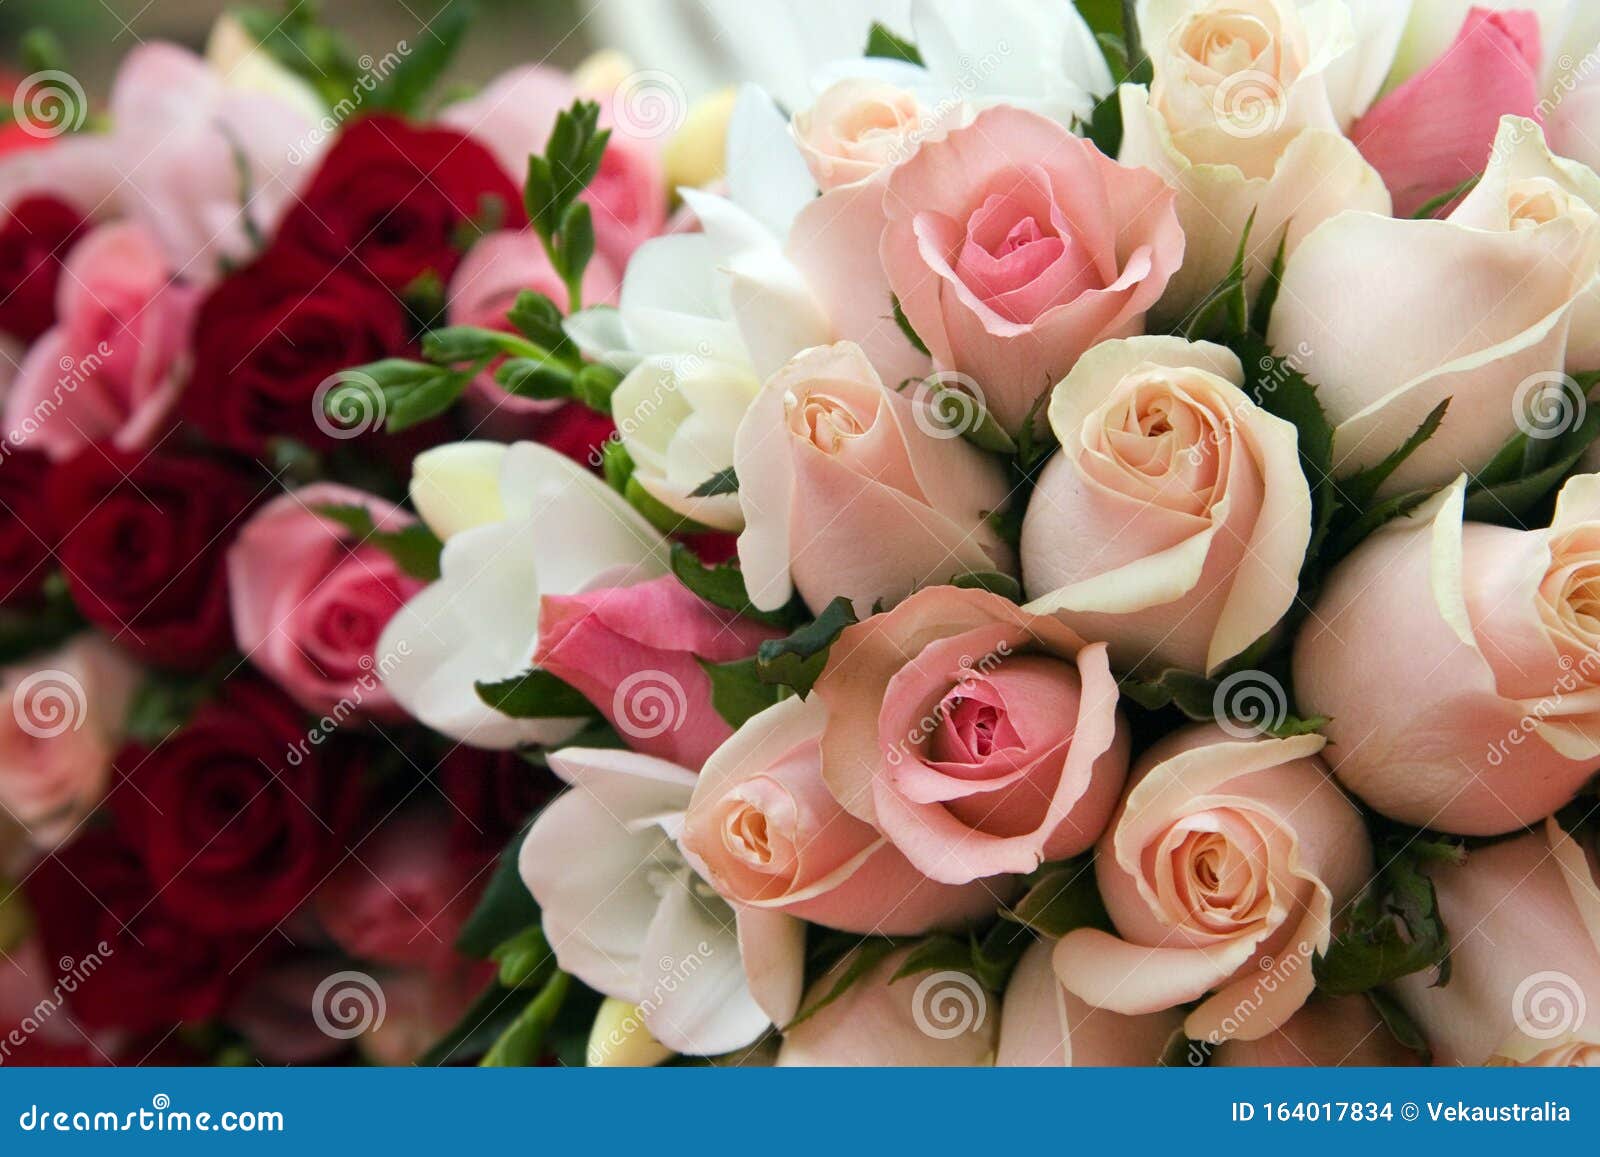 Pink Rose Flower Wedding Bouquet Stock Photo - Image of floral, white ...